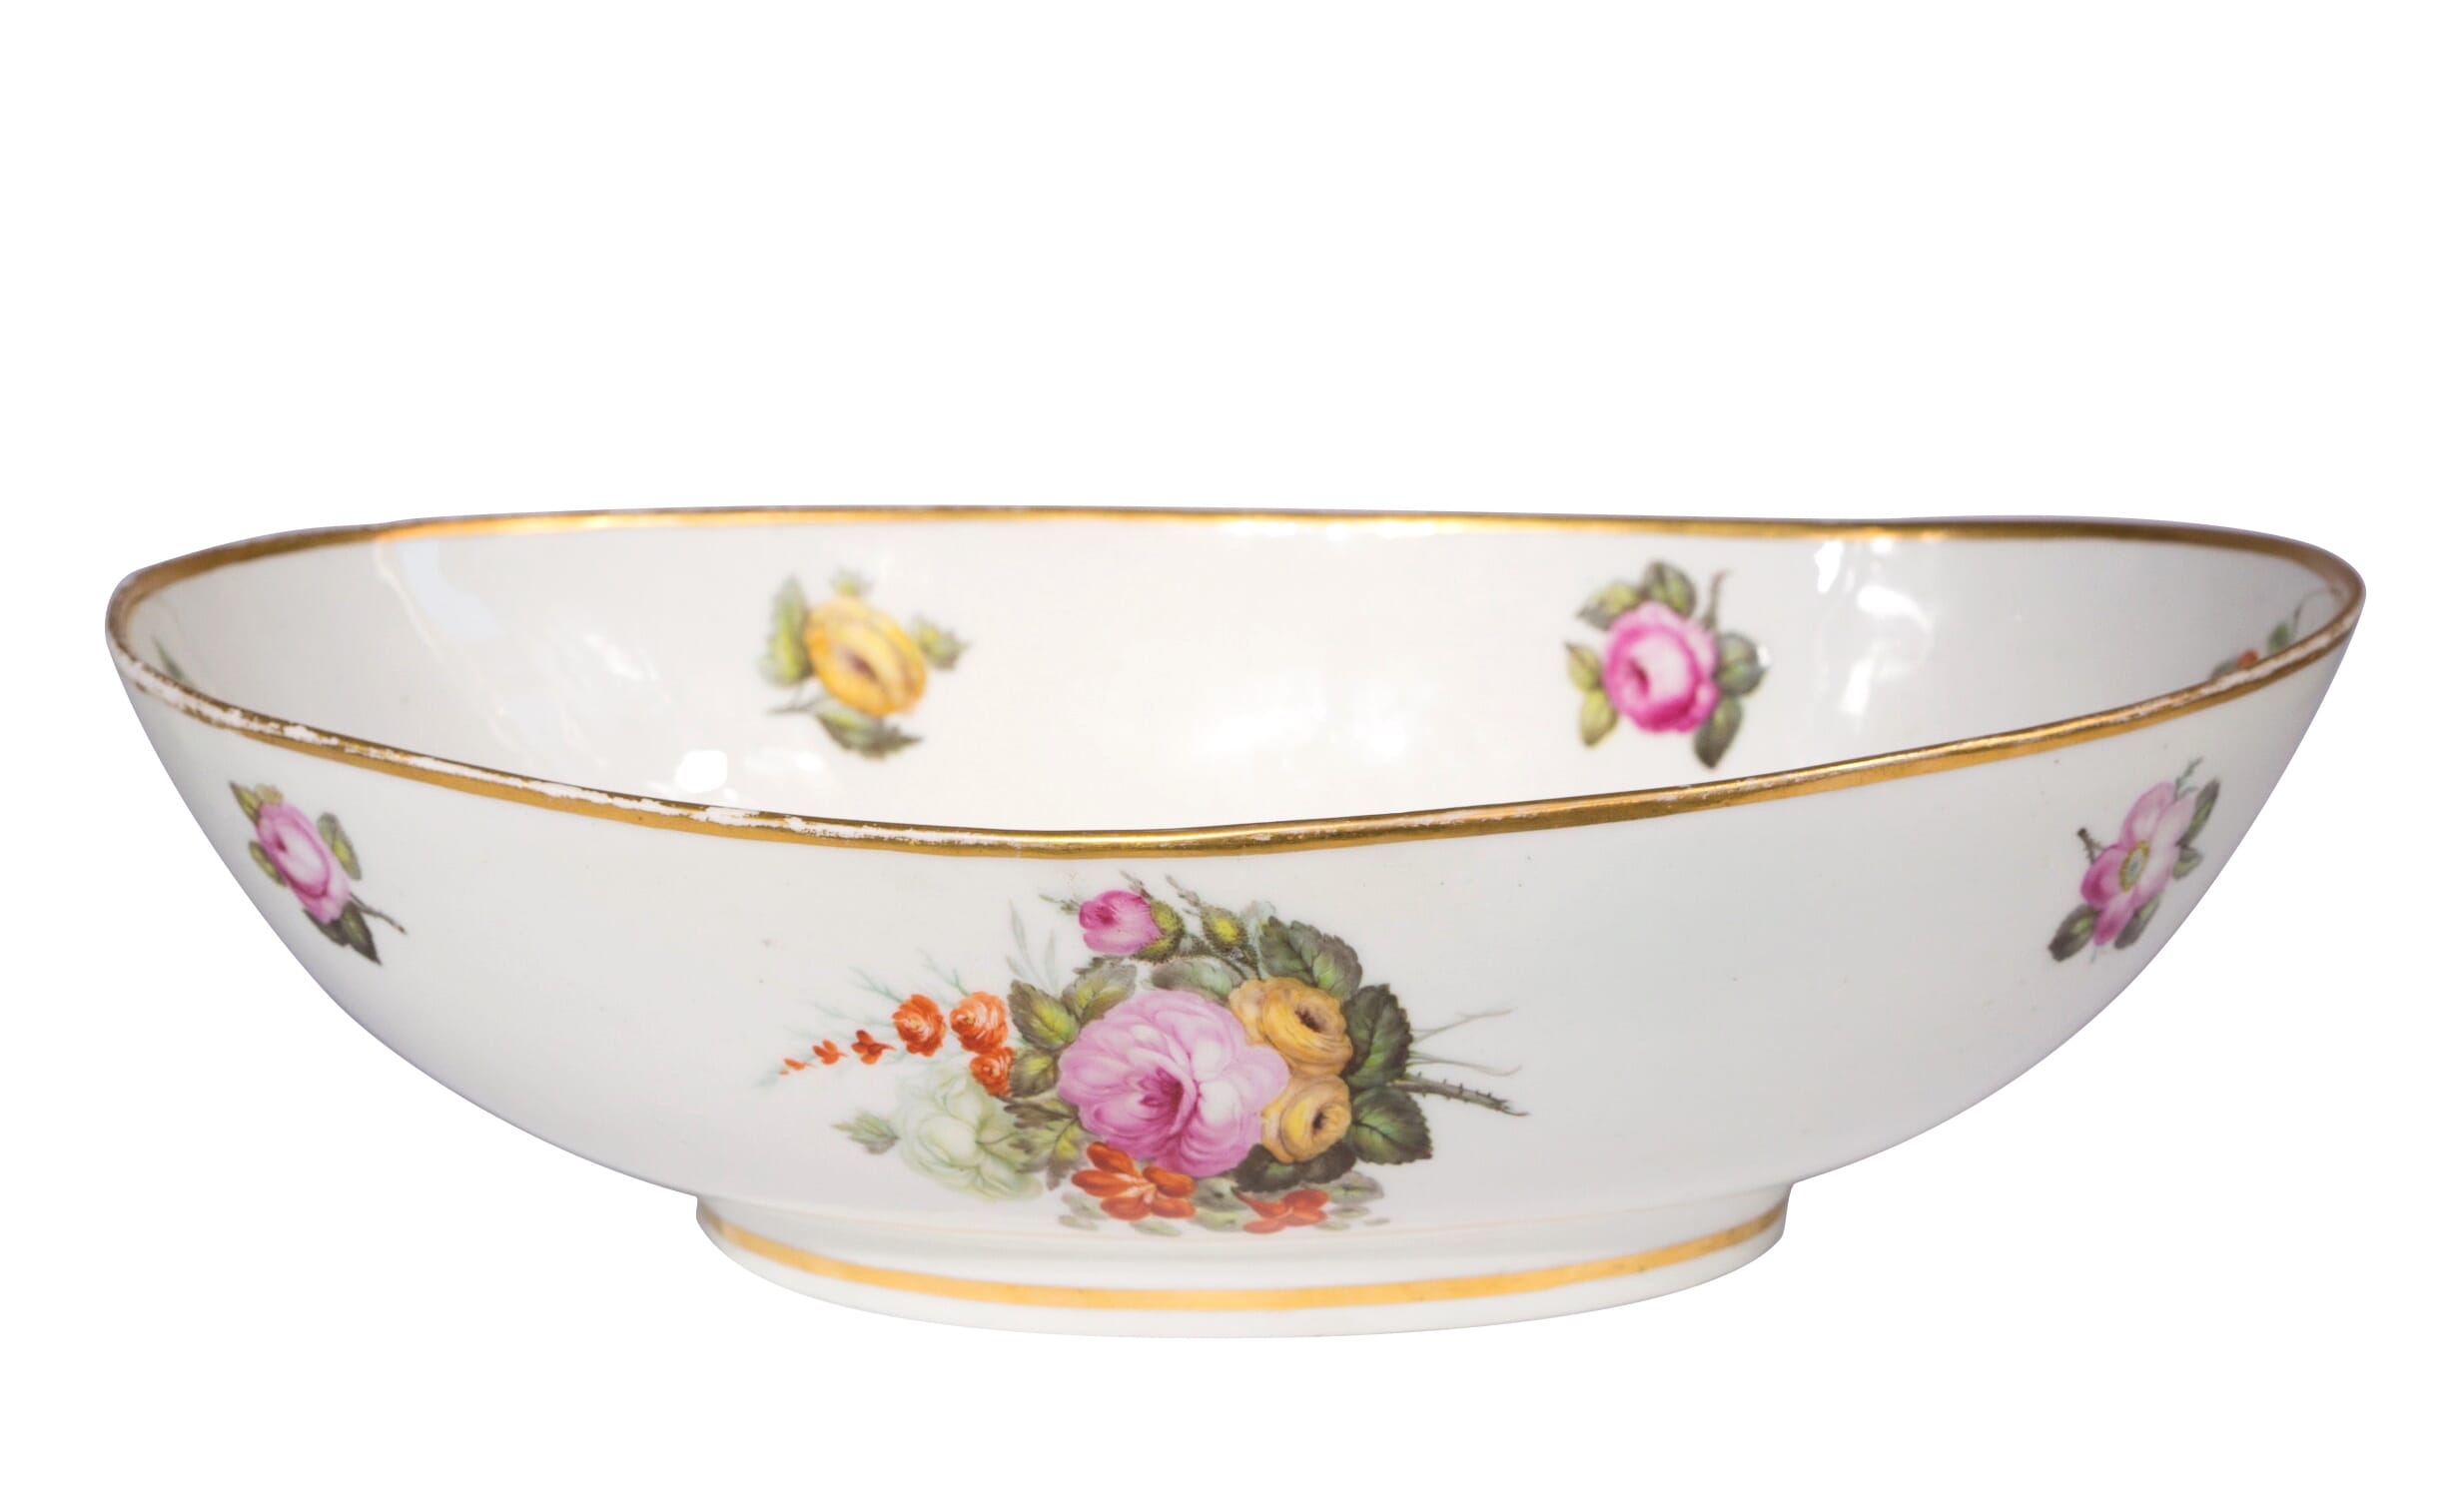 Large Derby basin painted with flowers att. William Billingsley, c.1790-0